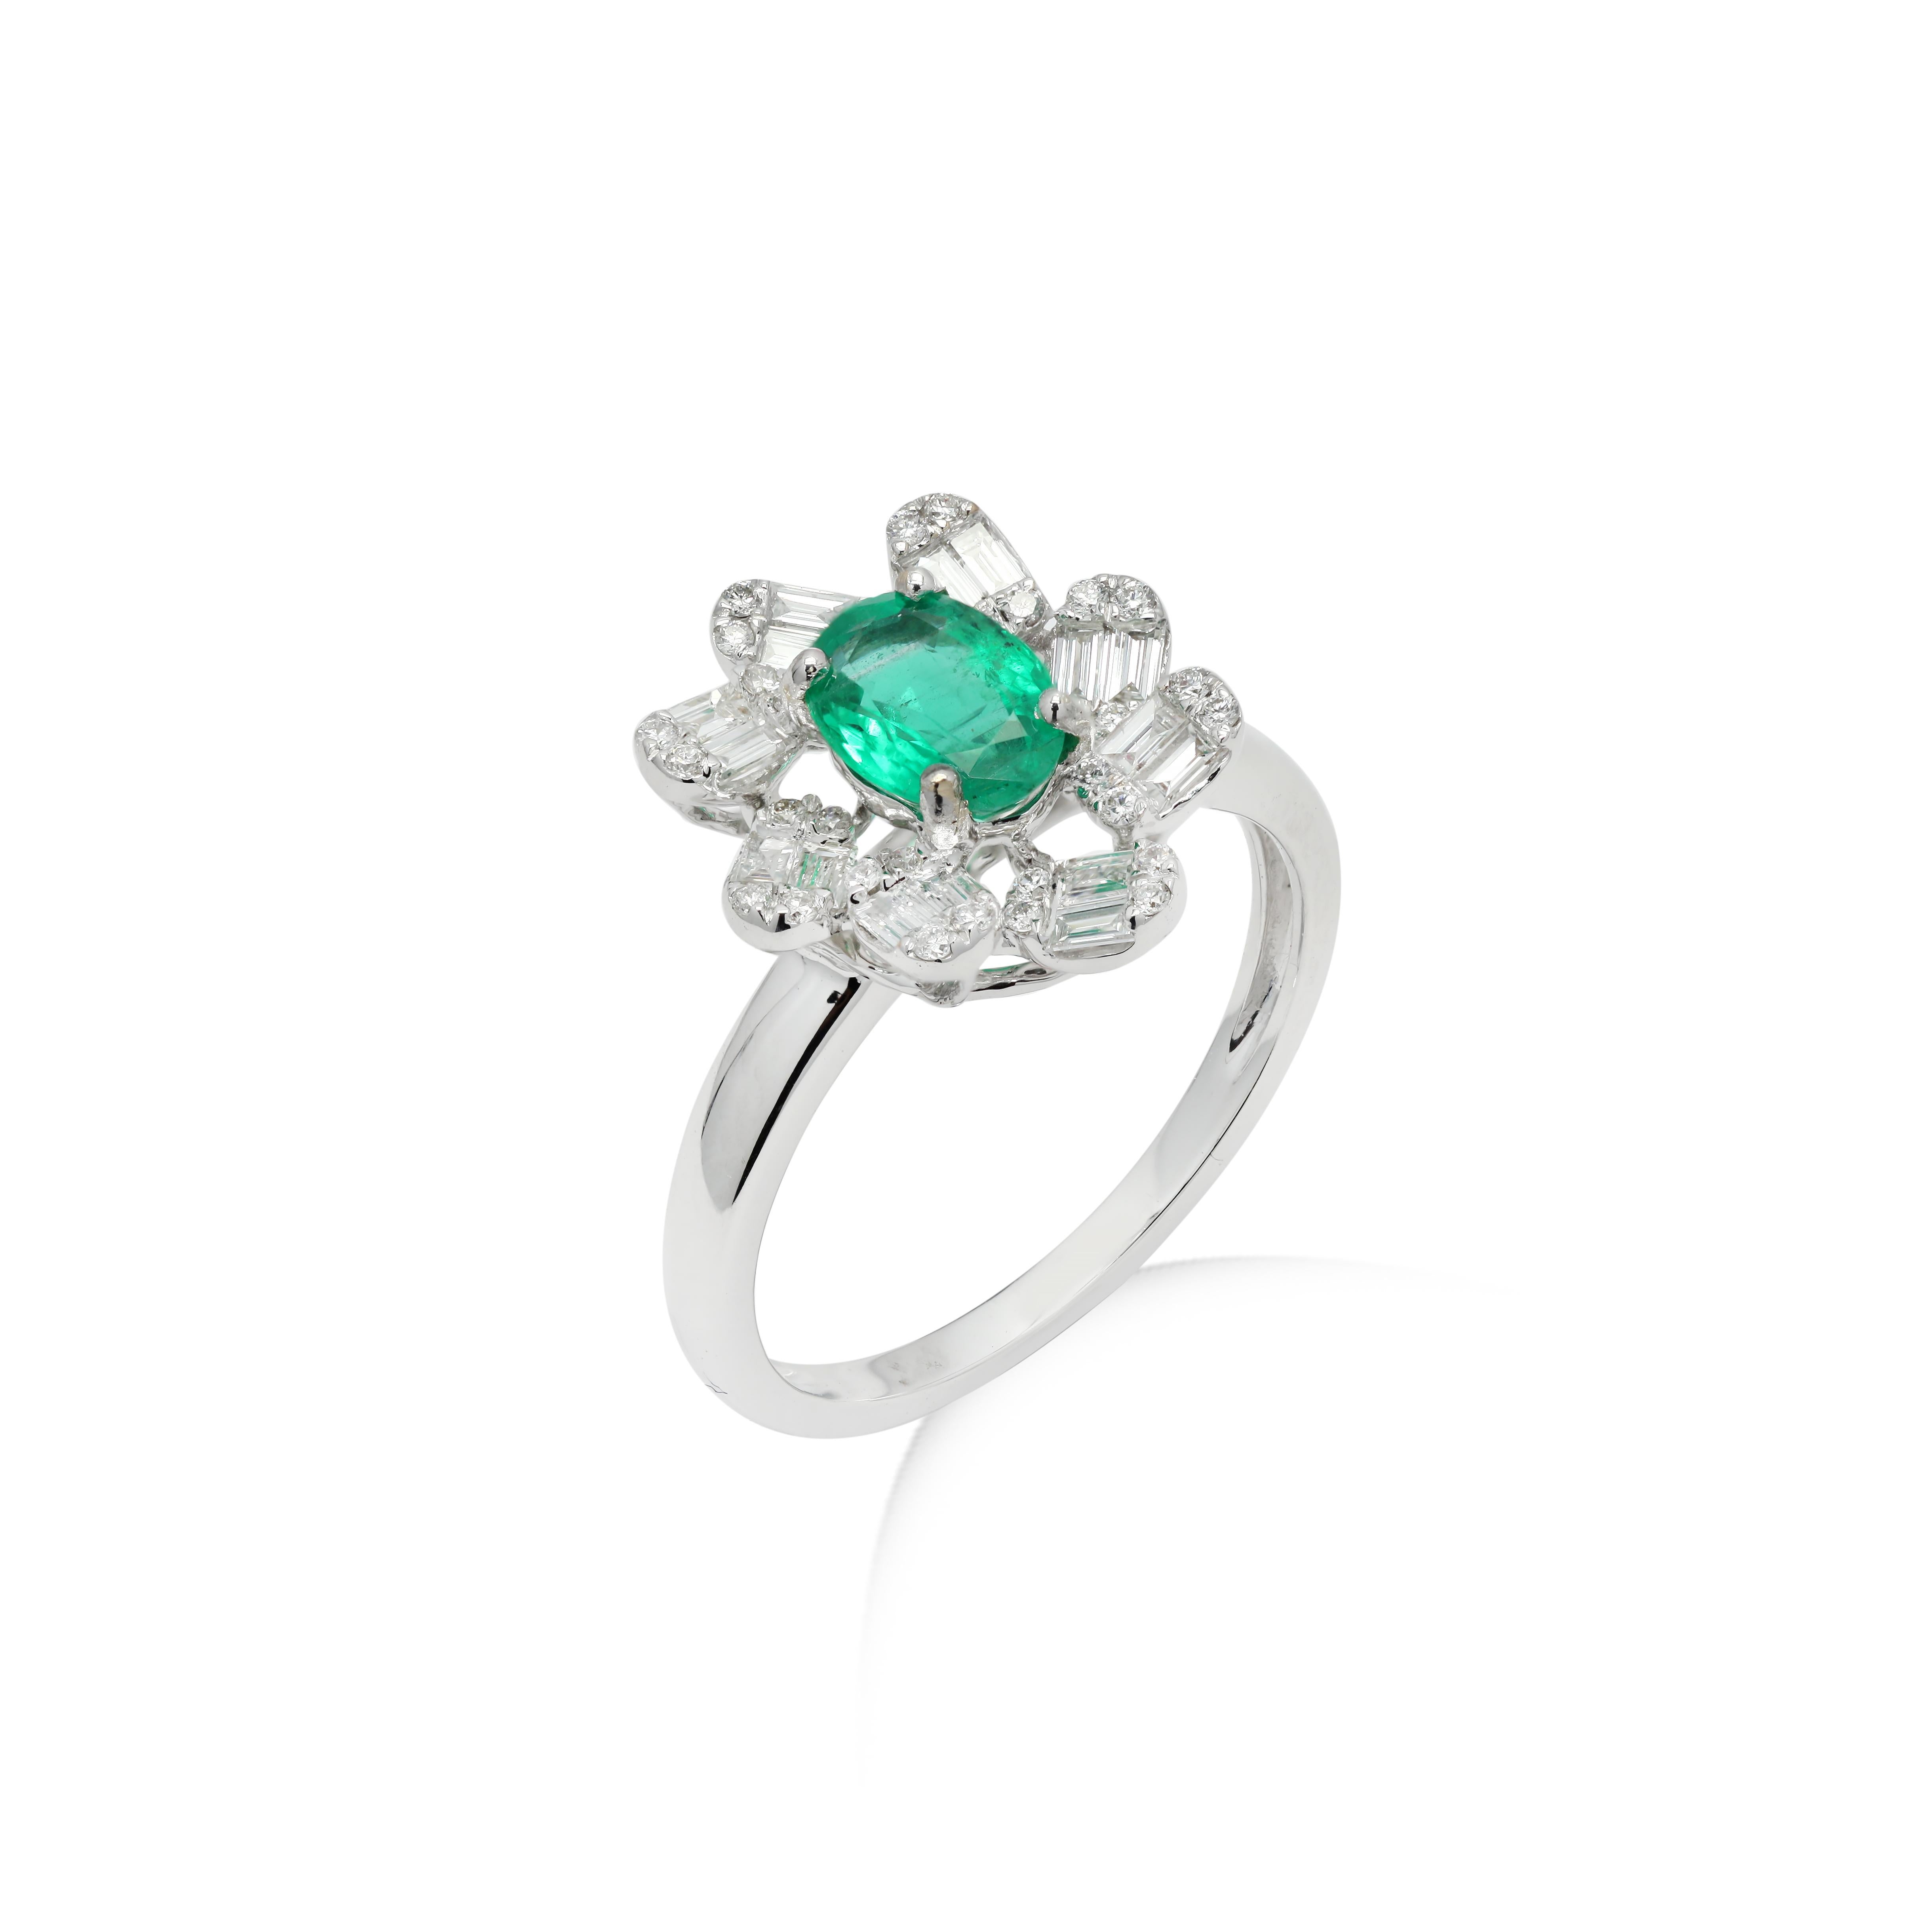 For Sale:  Designer Oval Cut Emerald and Diamond Engagement Ring in 18K Solid White Gold 4